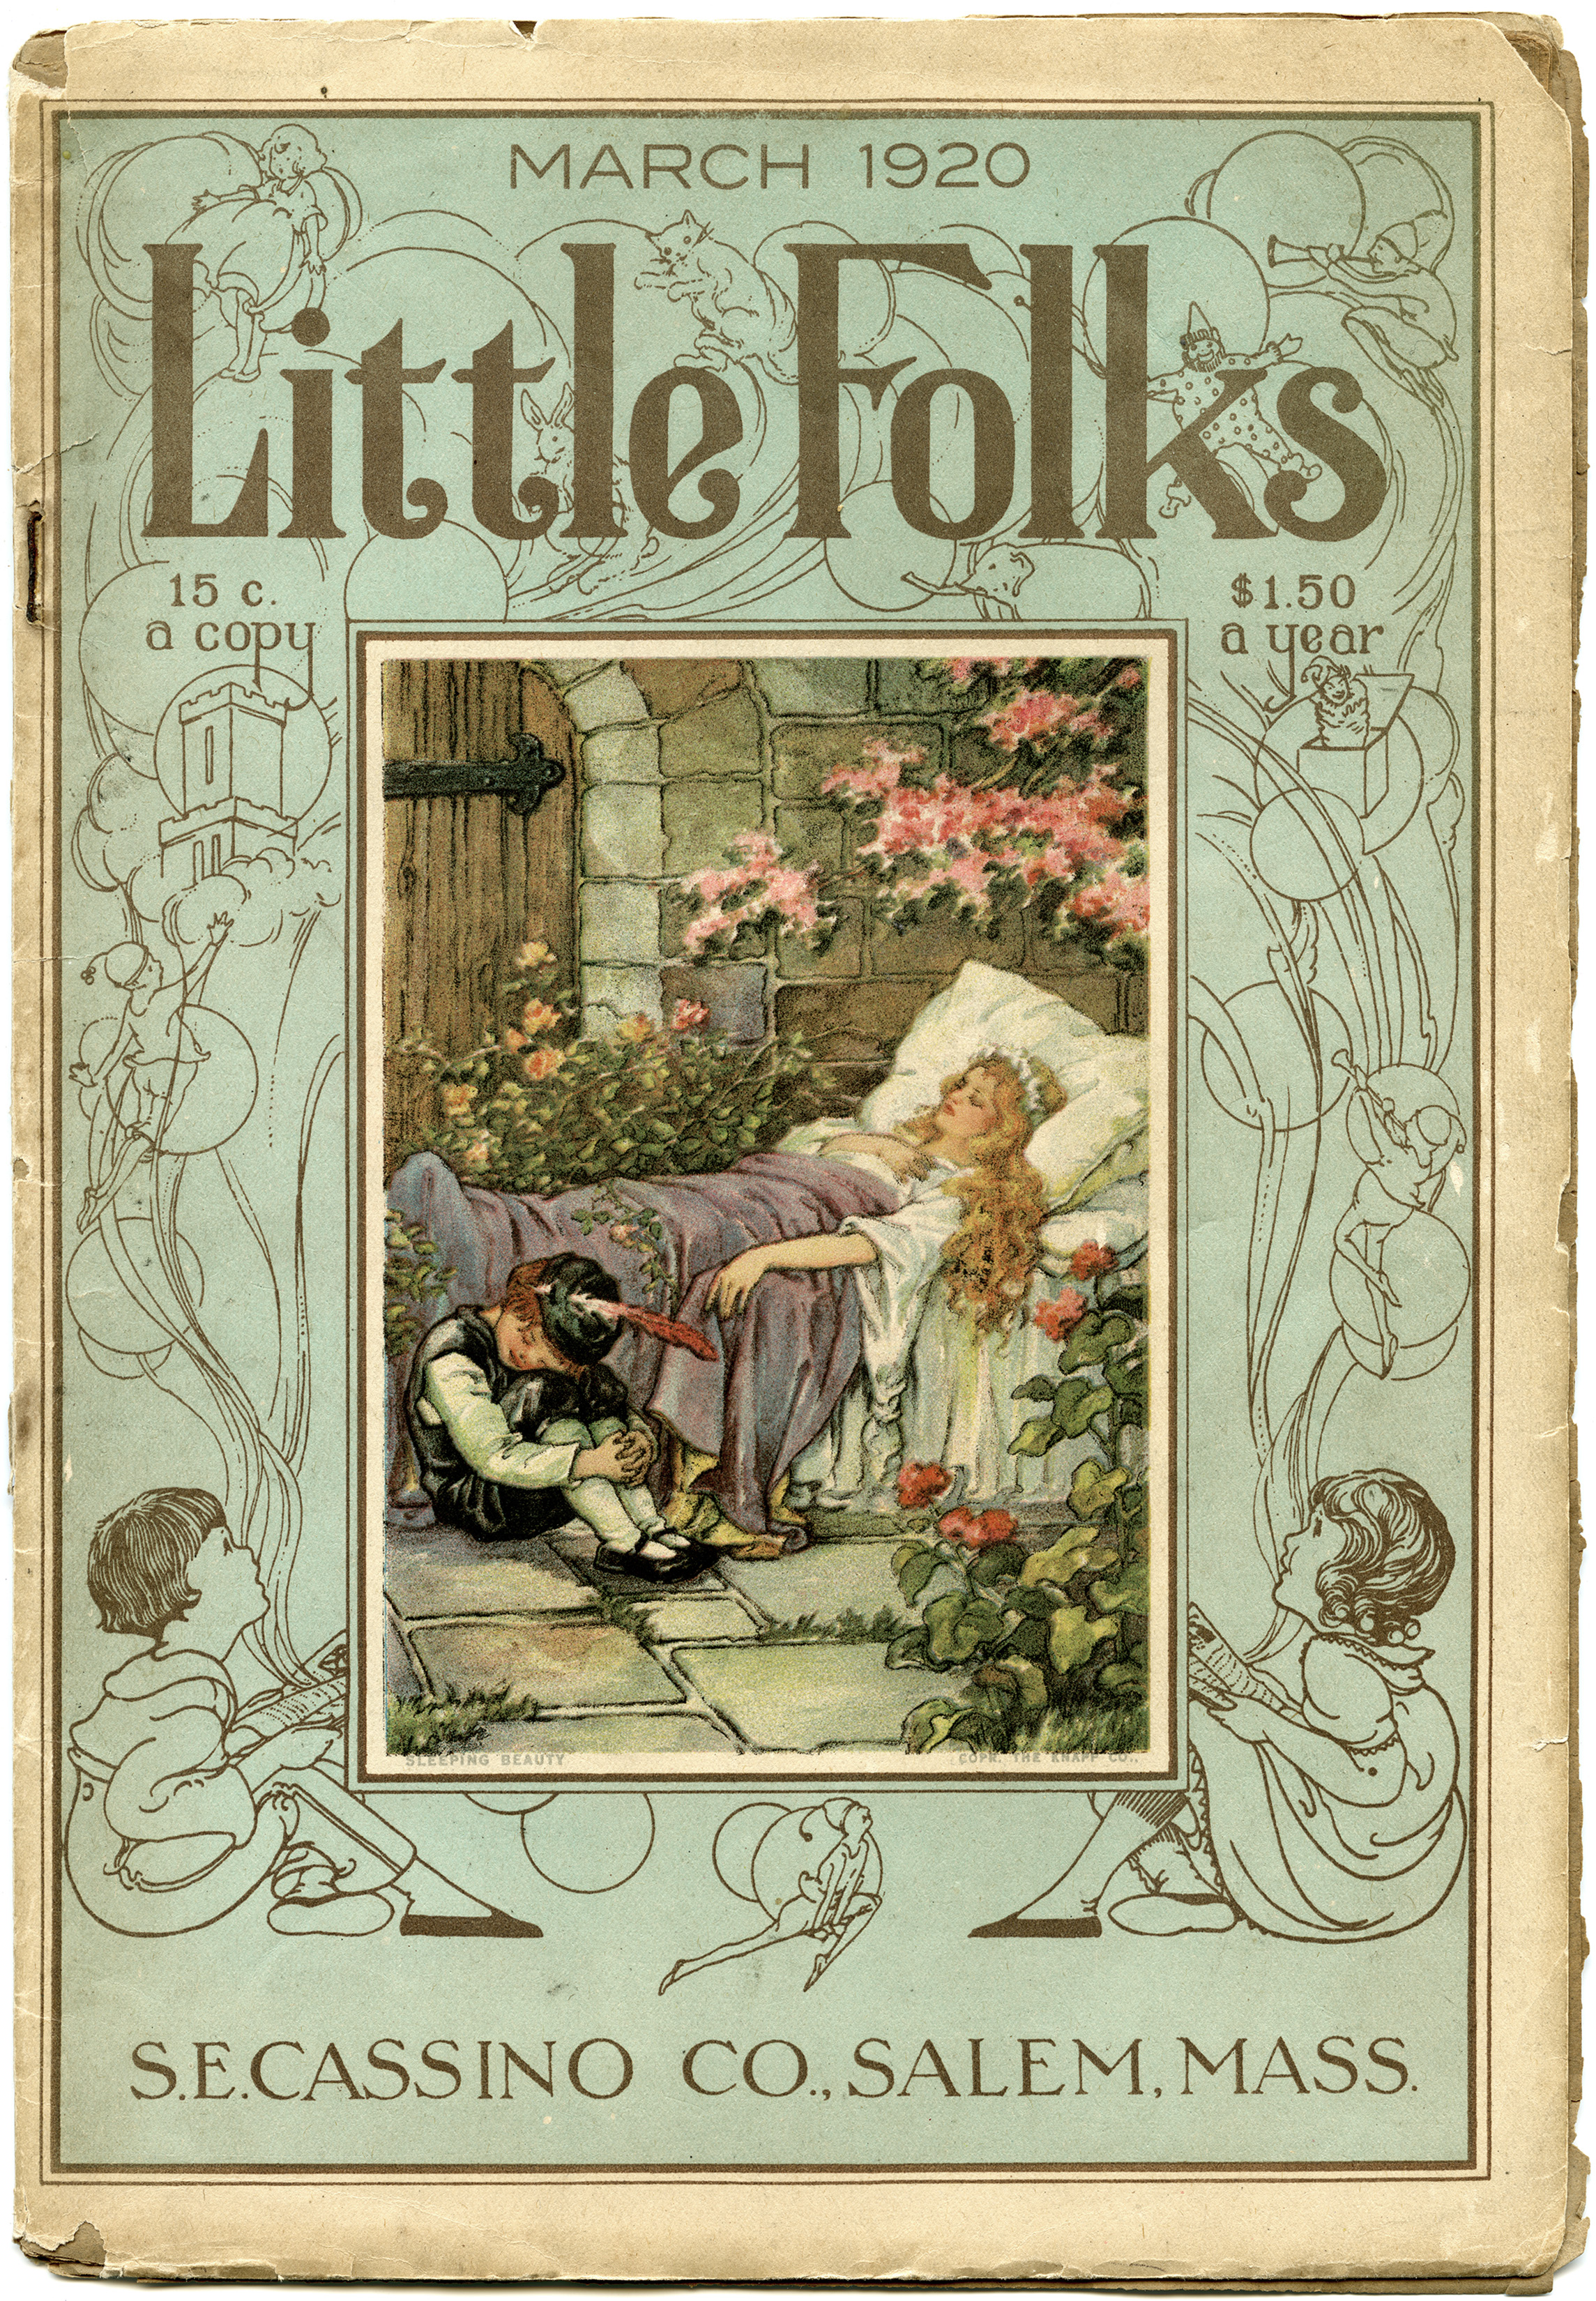 little folks magazine cover, public domain fairy tale, old book page, vintage paper graphics, sleeping beauty image